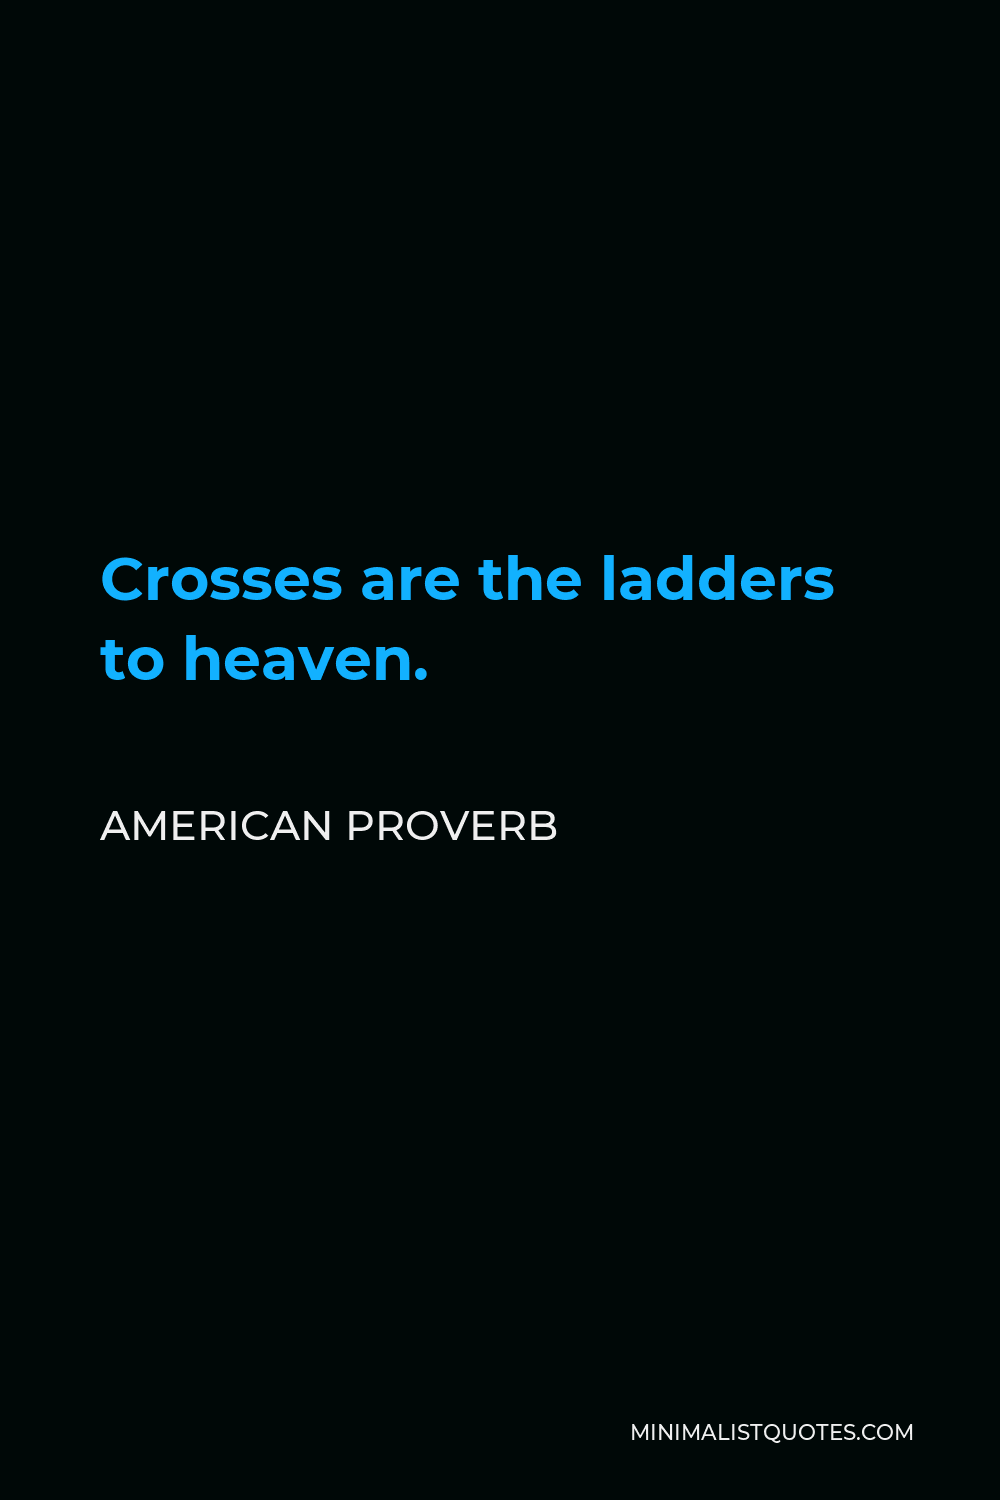 American Proverb Quote - Crosses are the ladders to heaven.